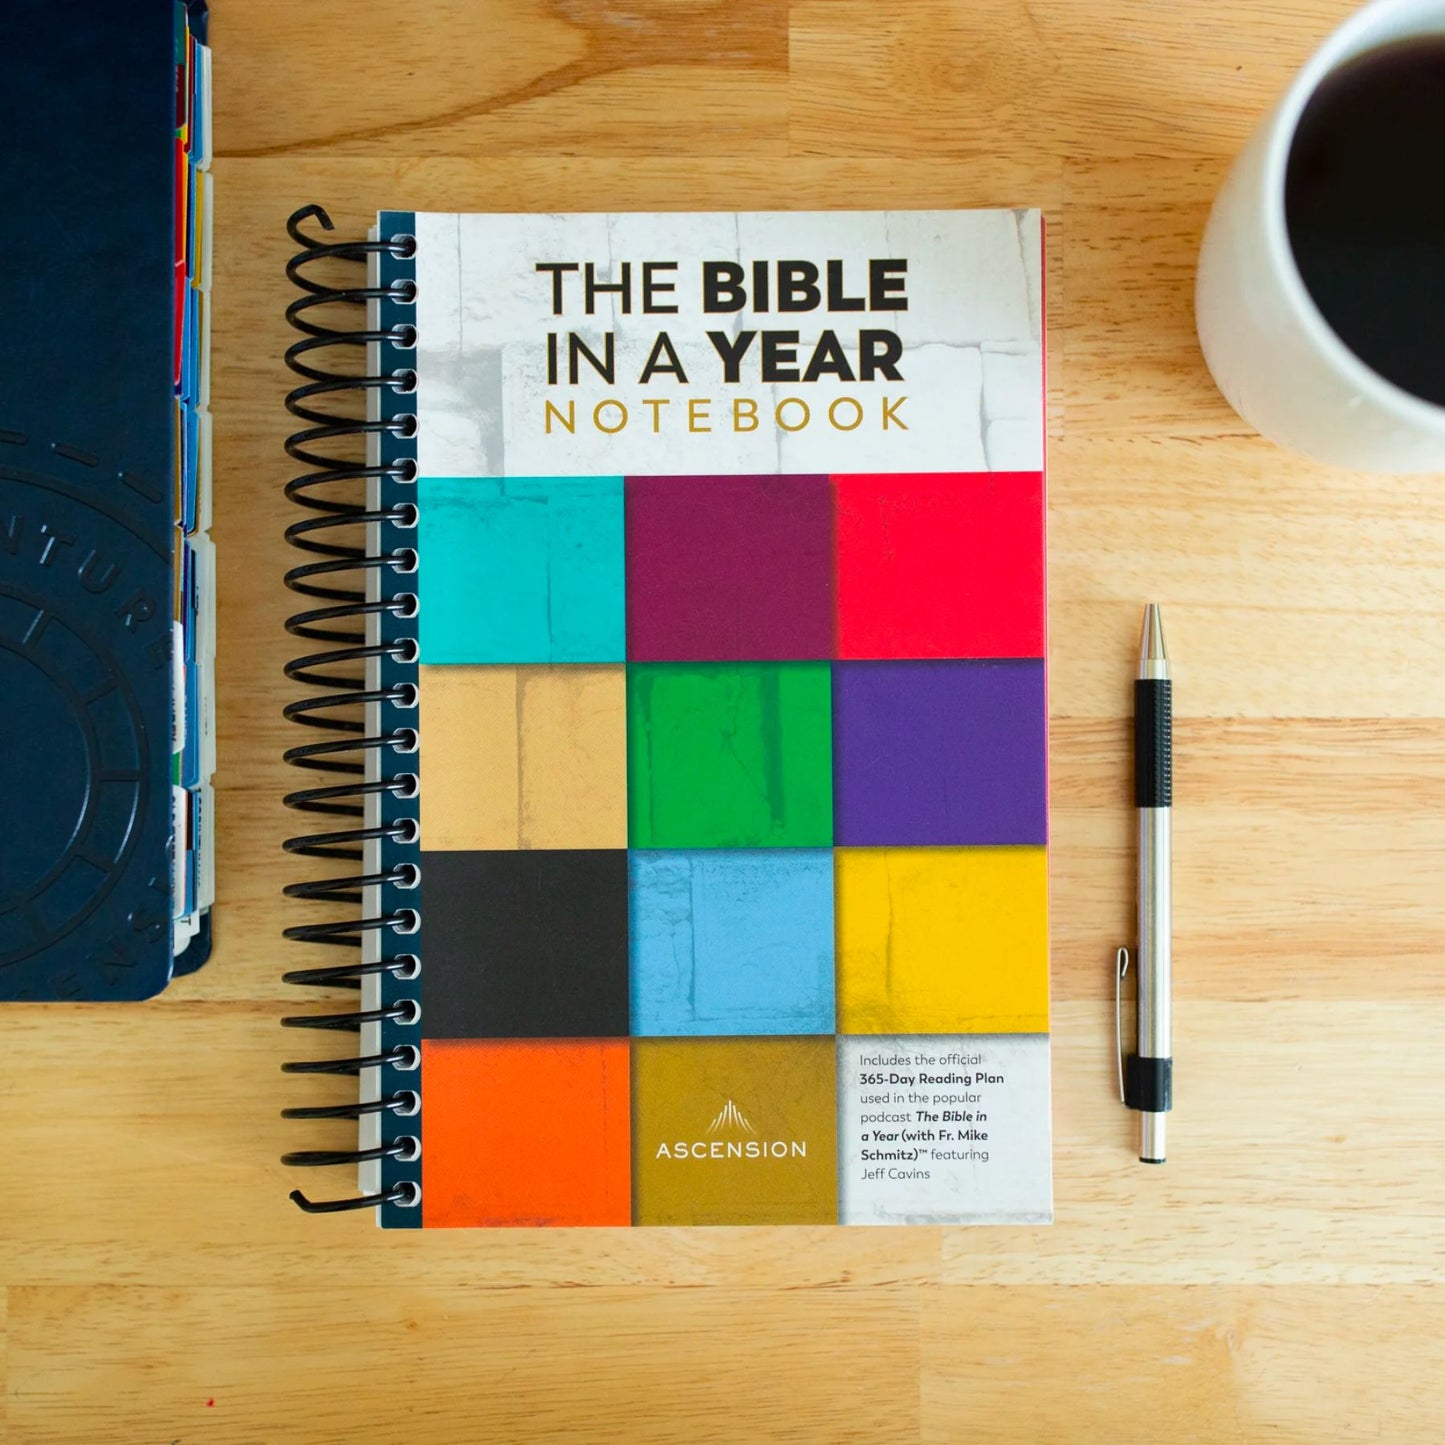 [PRE-ORDER] The Bible in a Year Notebook, 2nd Edition